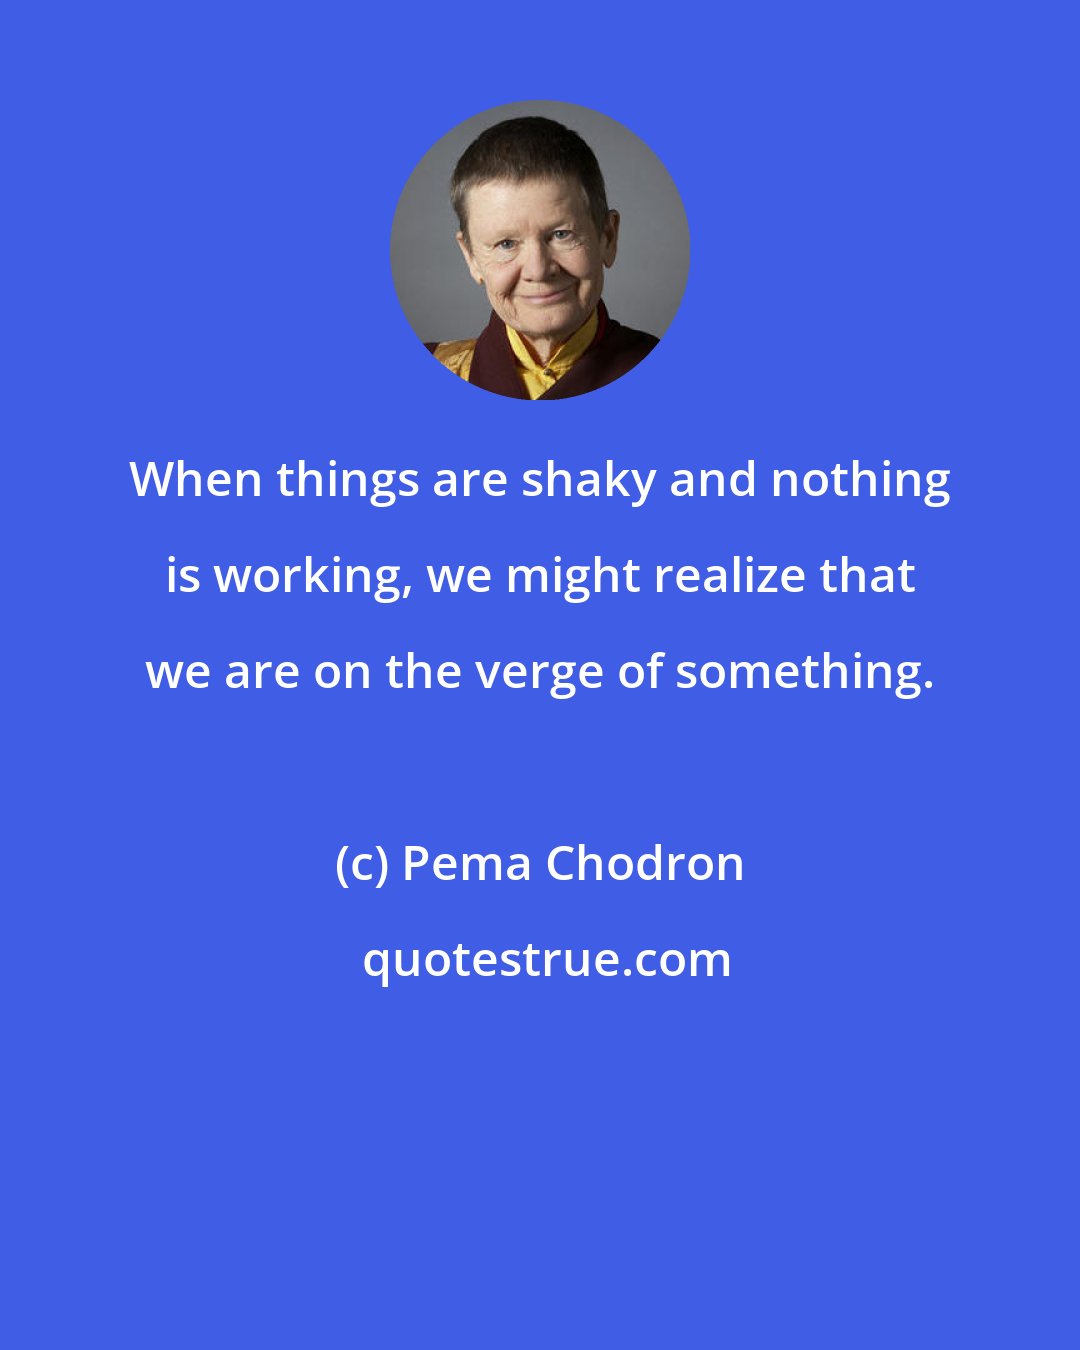 Pema Chodron: When things are shaky and nothing is working, we might realize that we are on the verge of something.